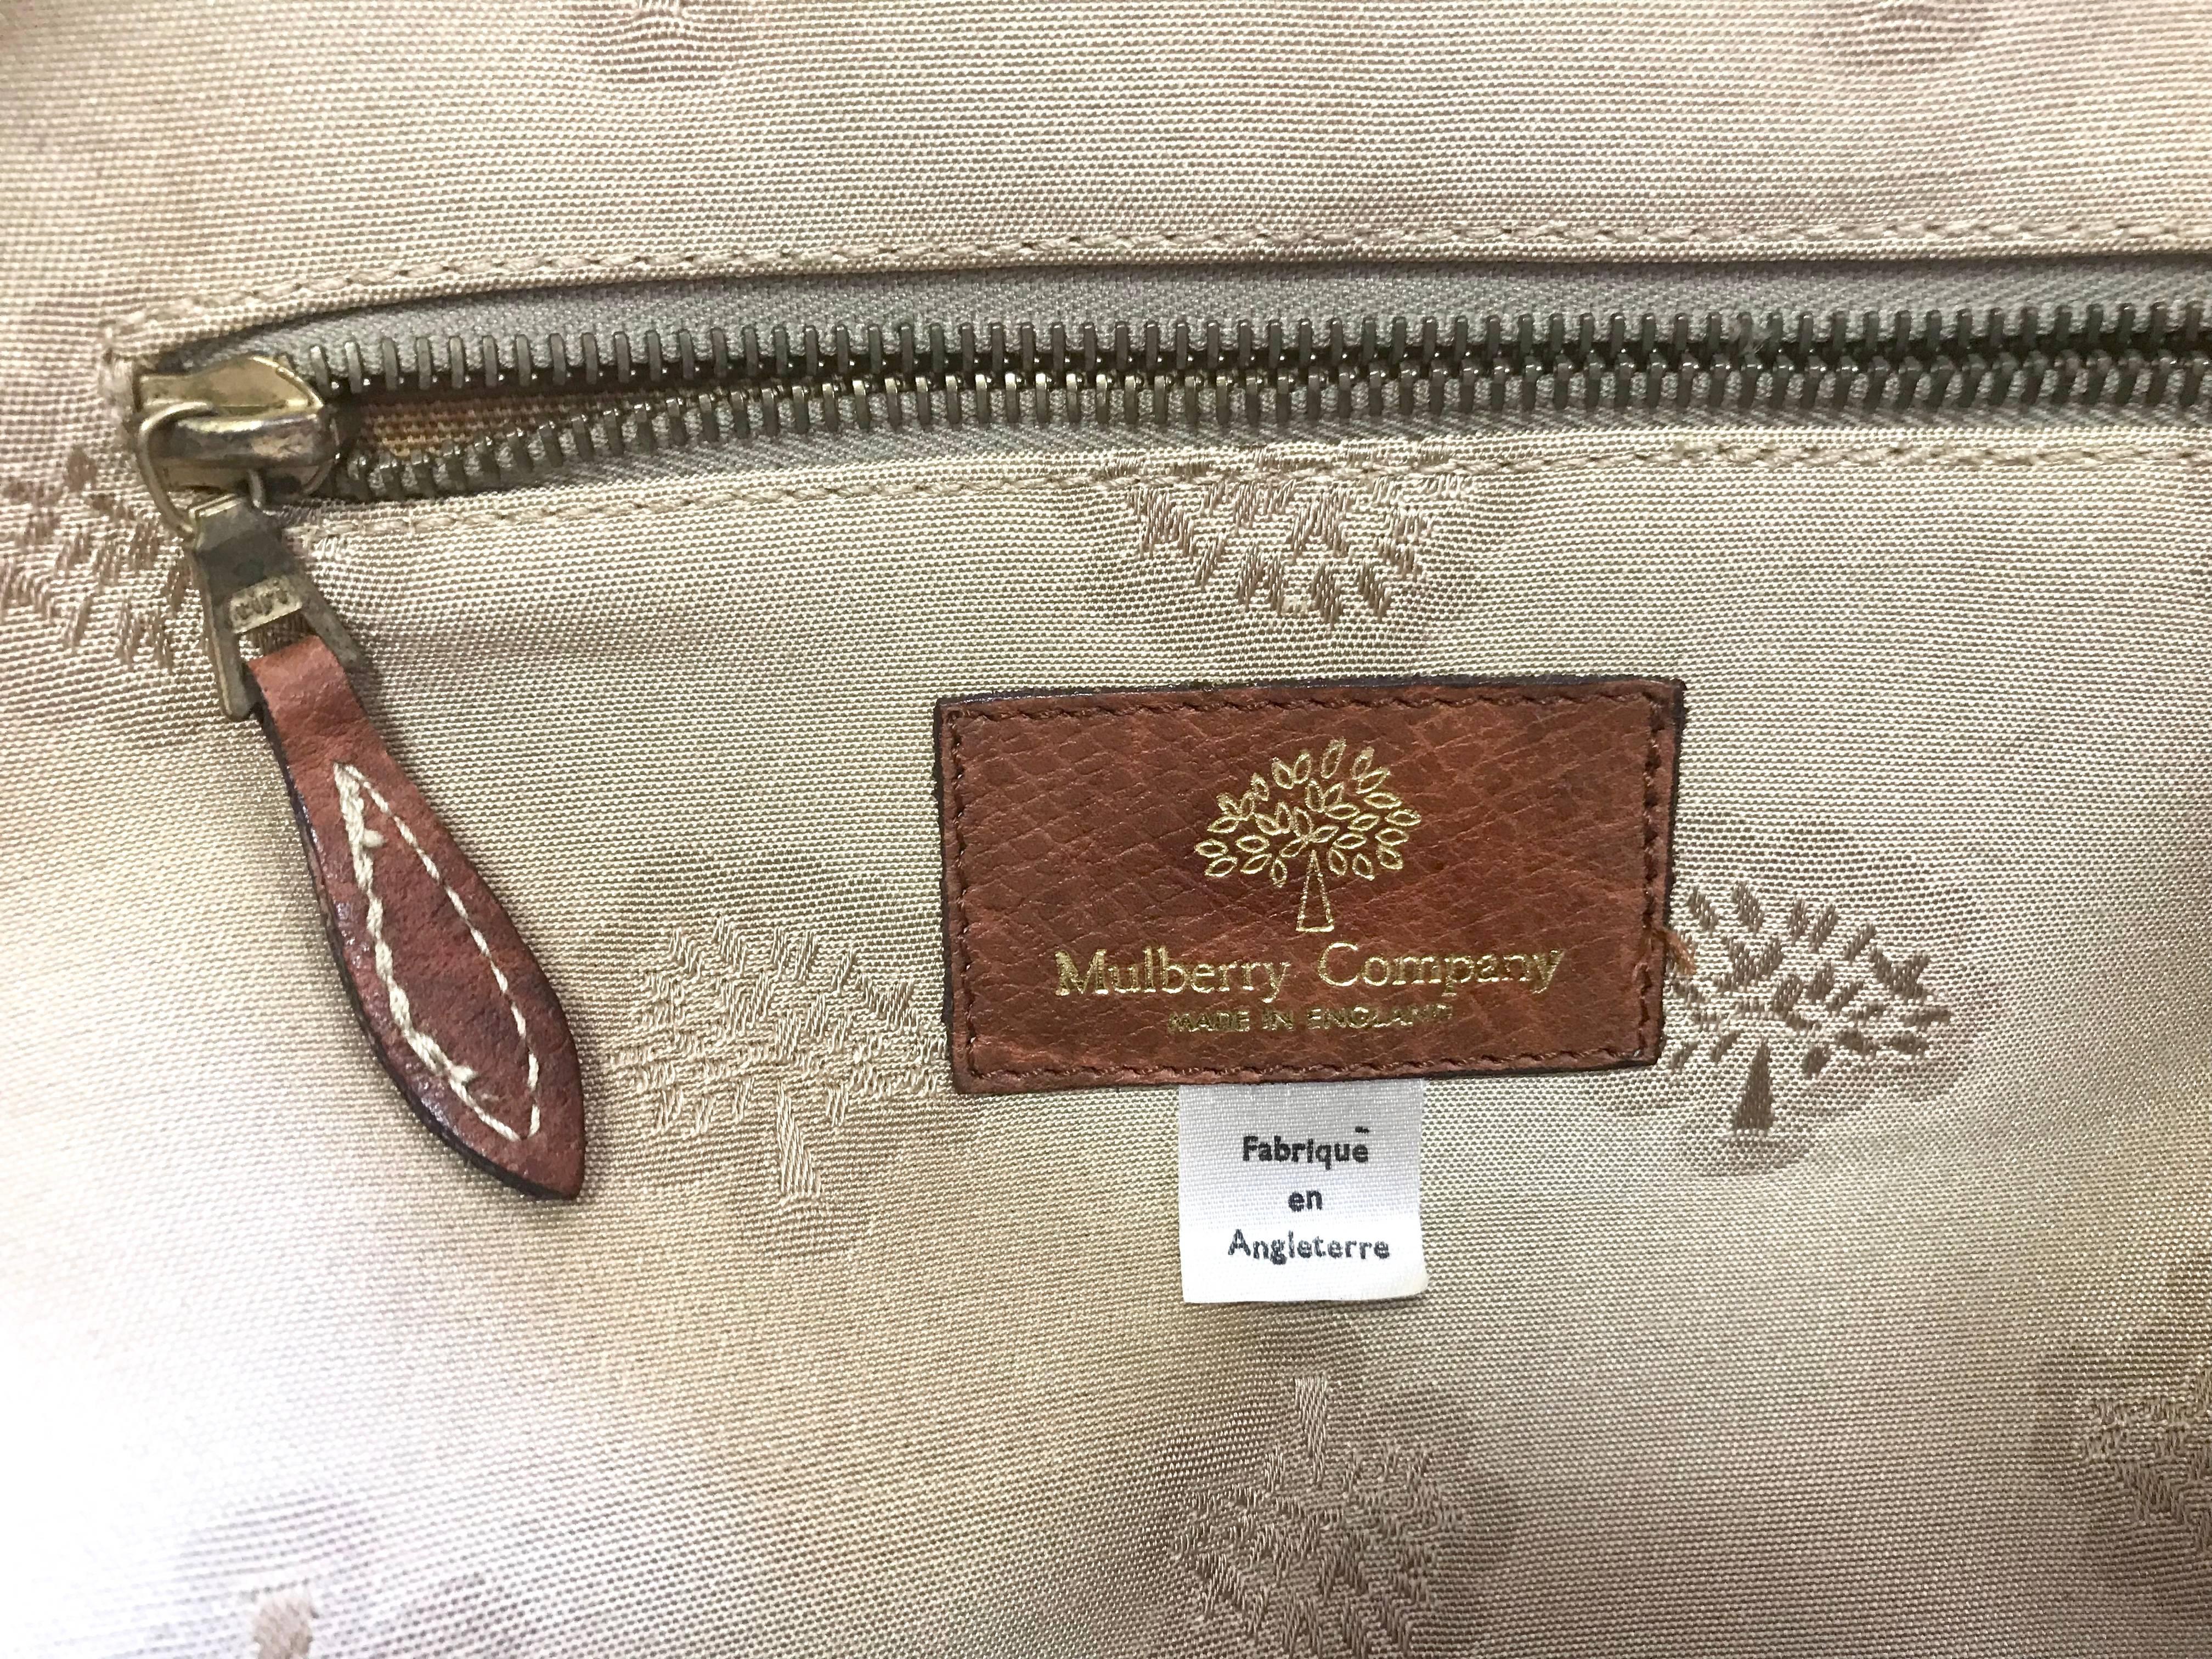 Vintage Mulberry beige logo jacquard fabric travel bag, duffle bag with leather. 8